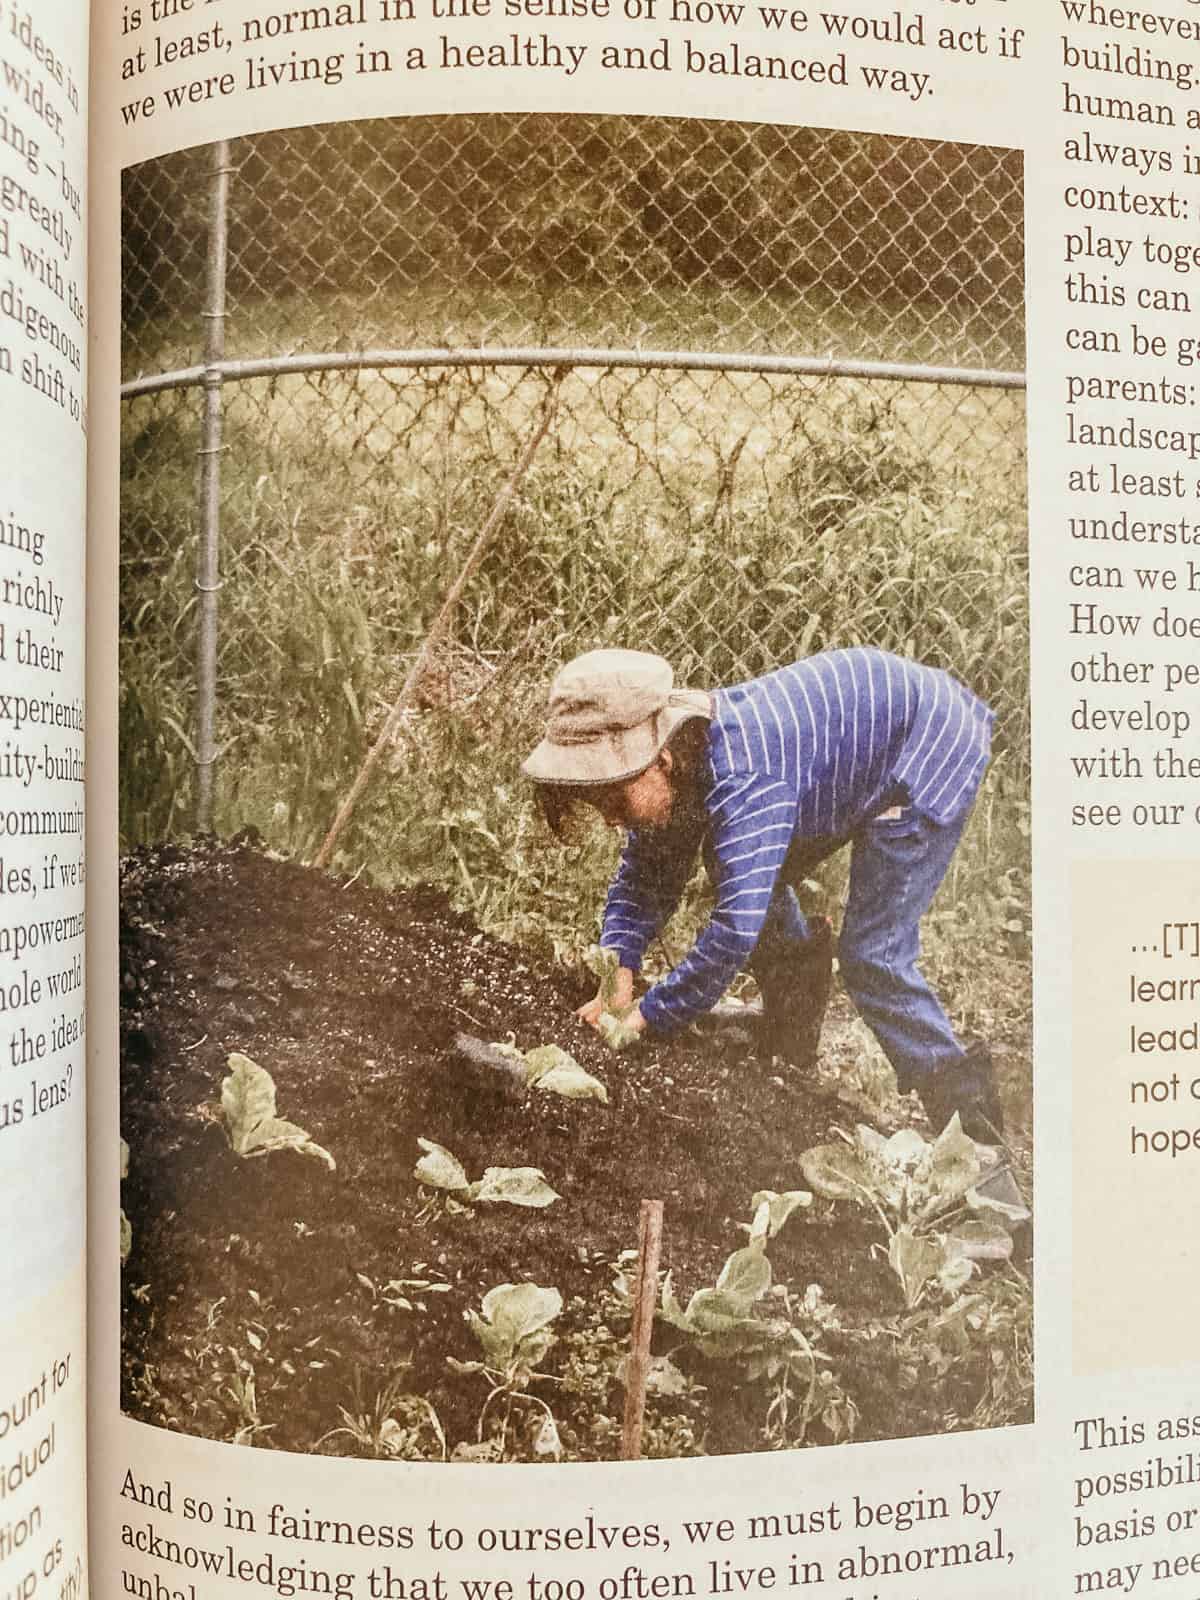 sample page from Natural Curiosity, 2nd edition includes an image of a child tending a garden